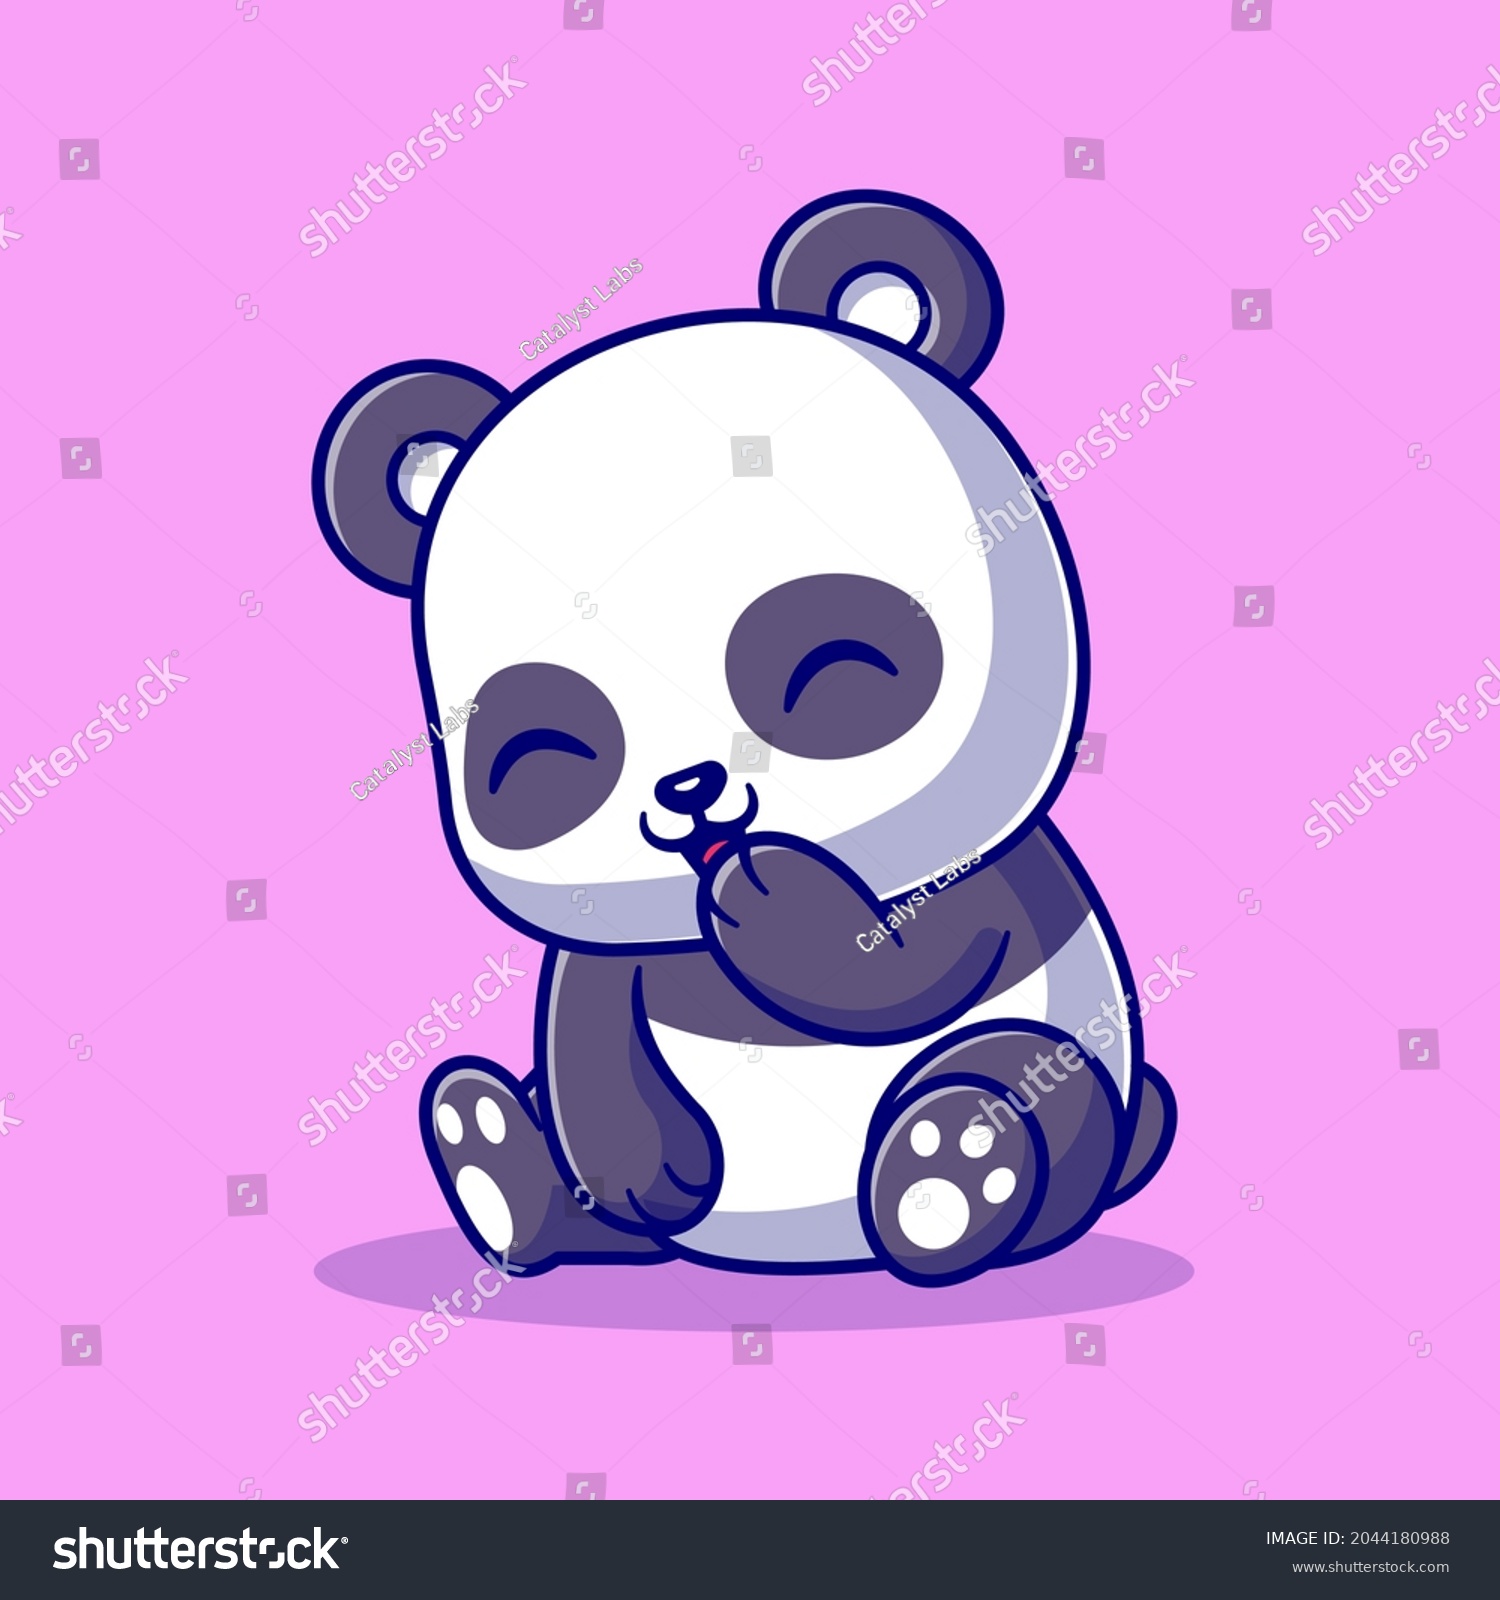 SVG of Cute Panda Laughing Cartoon Vector Icon Illustration. Animal Nature Icon Concept Isolated Premium Vector. Flat Cartoon Style svg